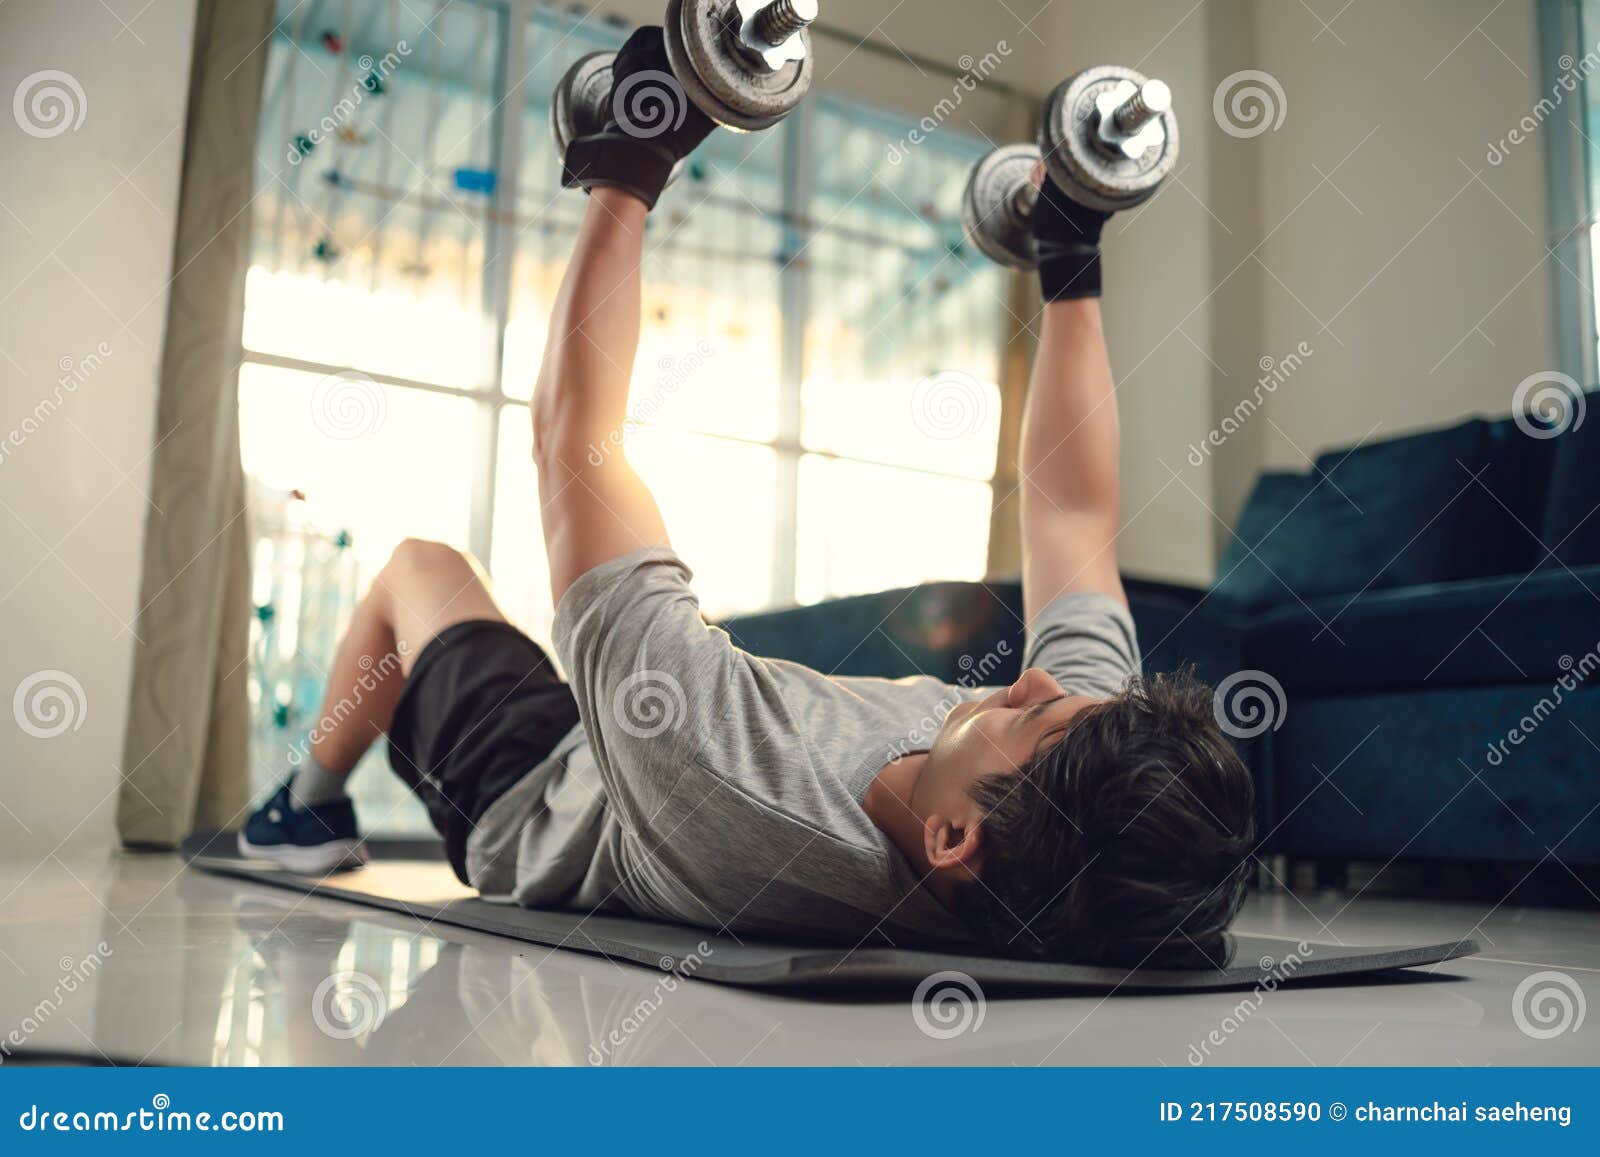 Young Man Use Dumbbell Exercises Chest Fly on Yoga Mat in Living